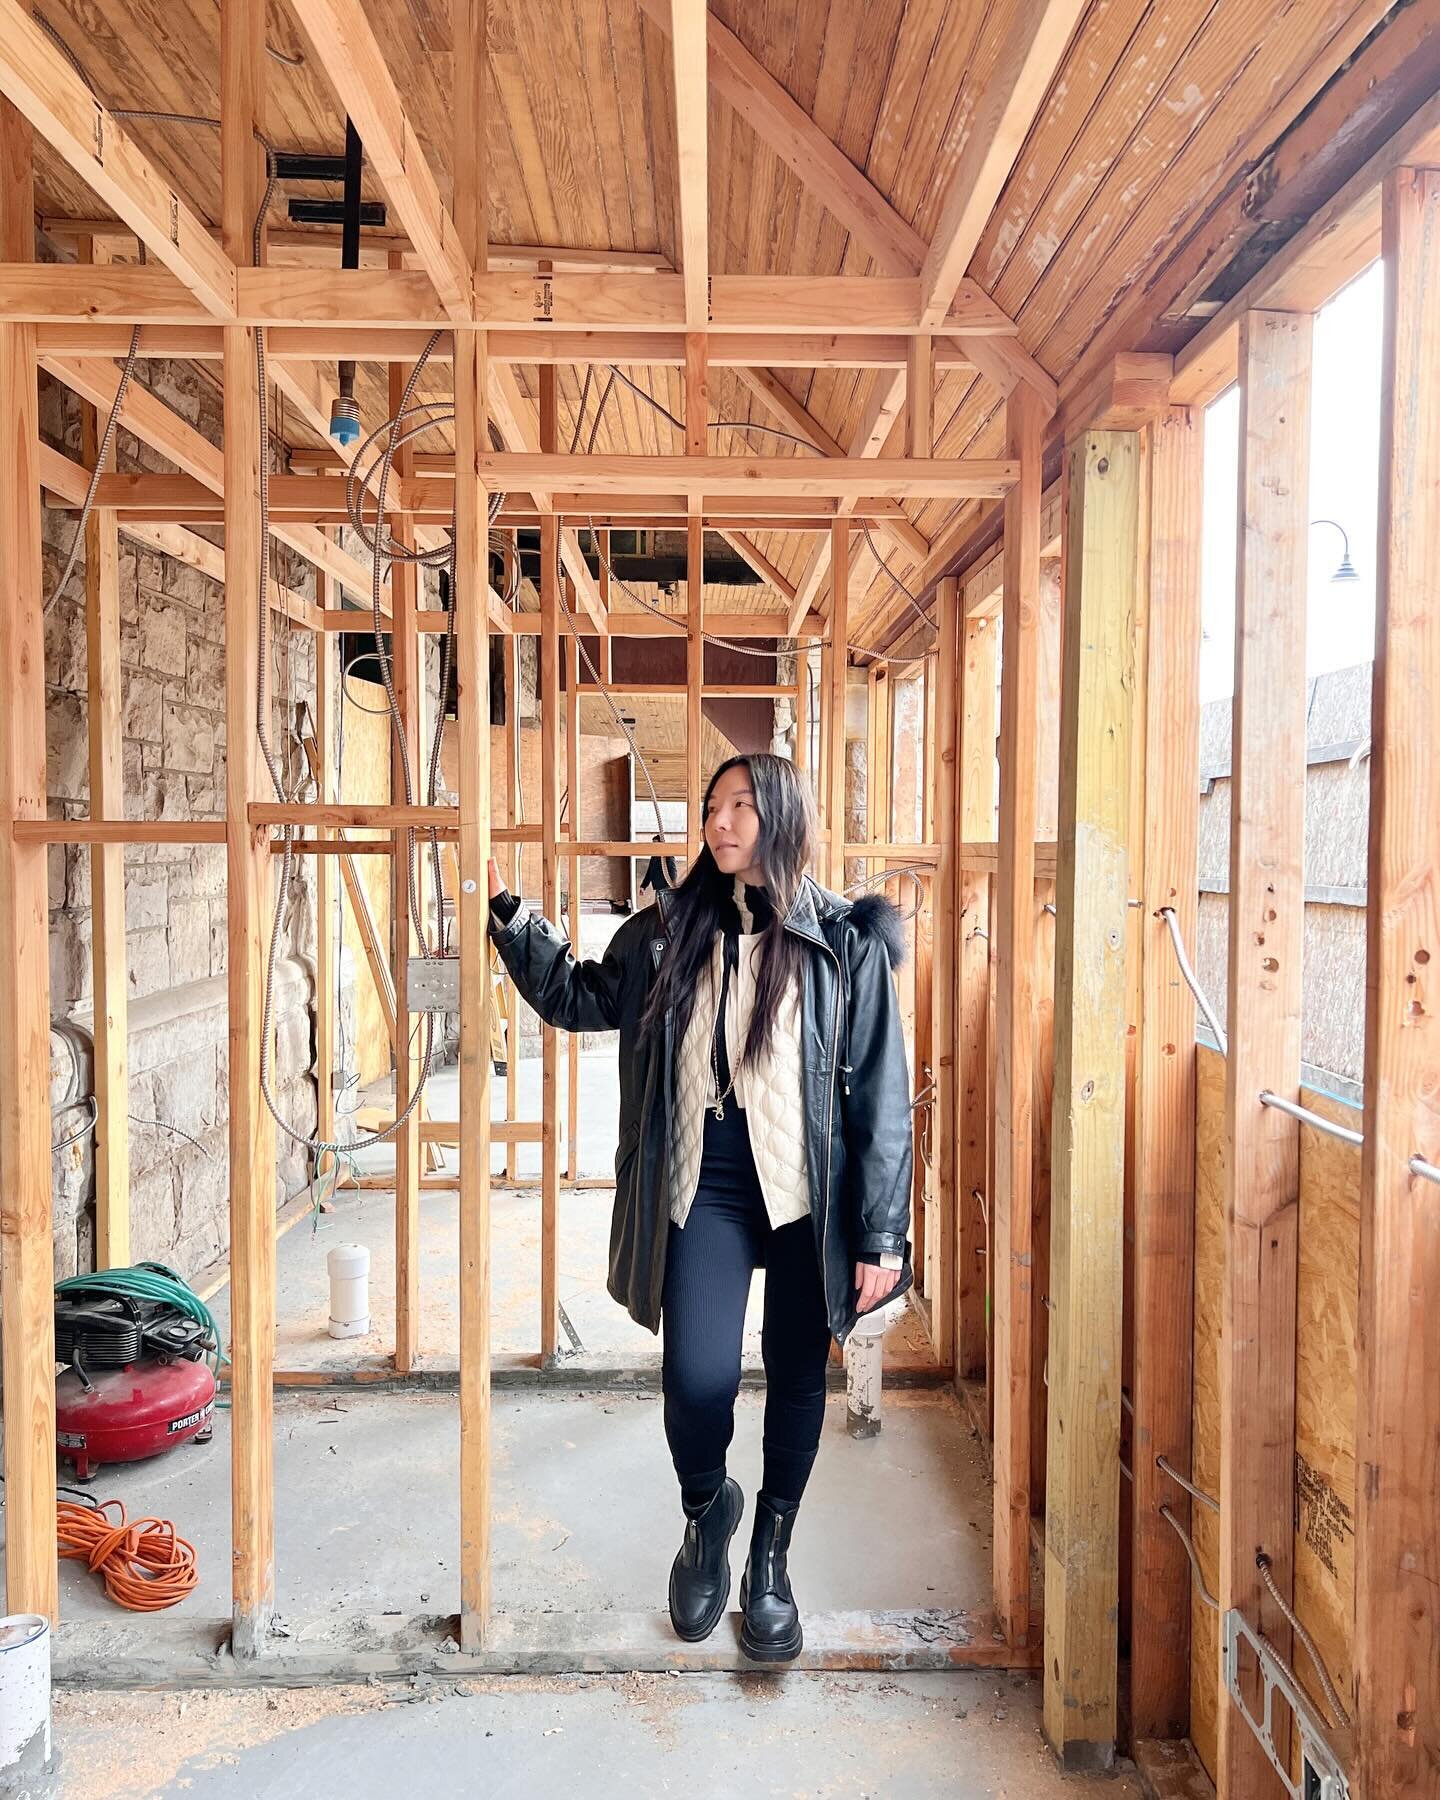 Early morning site visit to our largest renovation project to date. A historic train station built in early 1900&rsquo;s. Projected opening to be this Spring 2024 🌿✨🌿 
We are oh so excited! @maize_westfield 

🚂✨🧿🔸🧿🔸✨

Major progress since our 